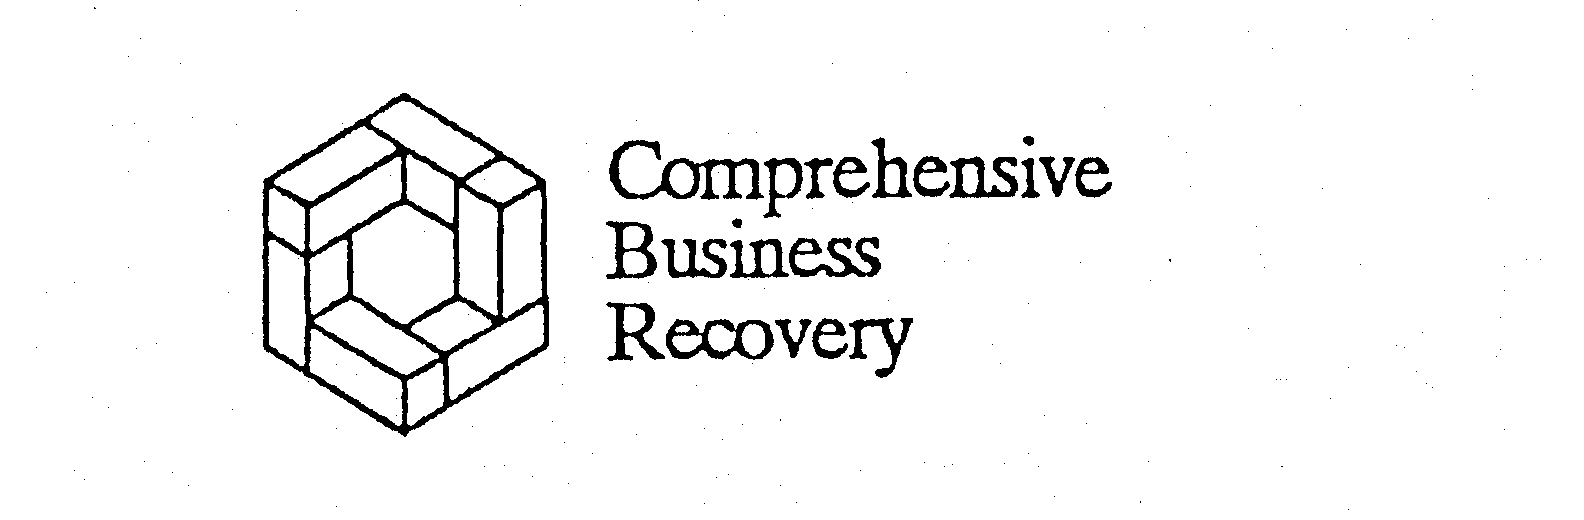  COMPREHENSIVE BUSINESS RECOVERY